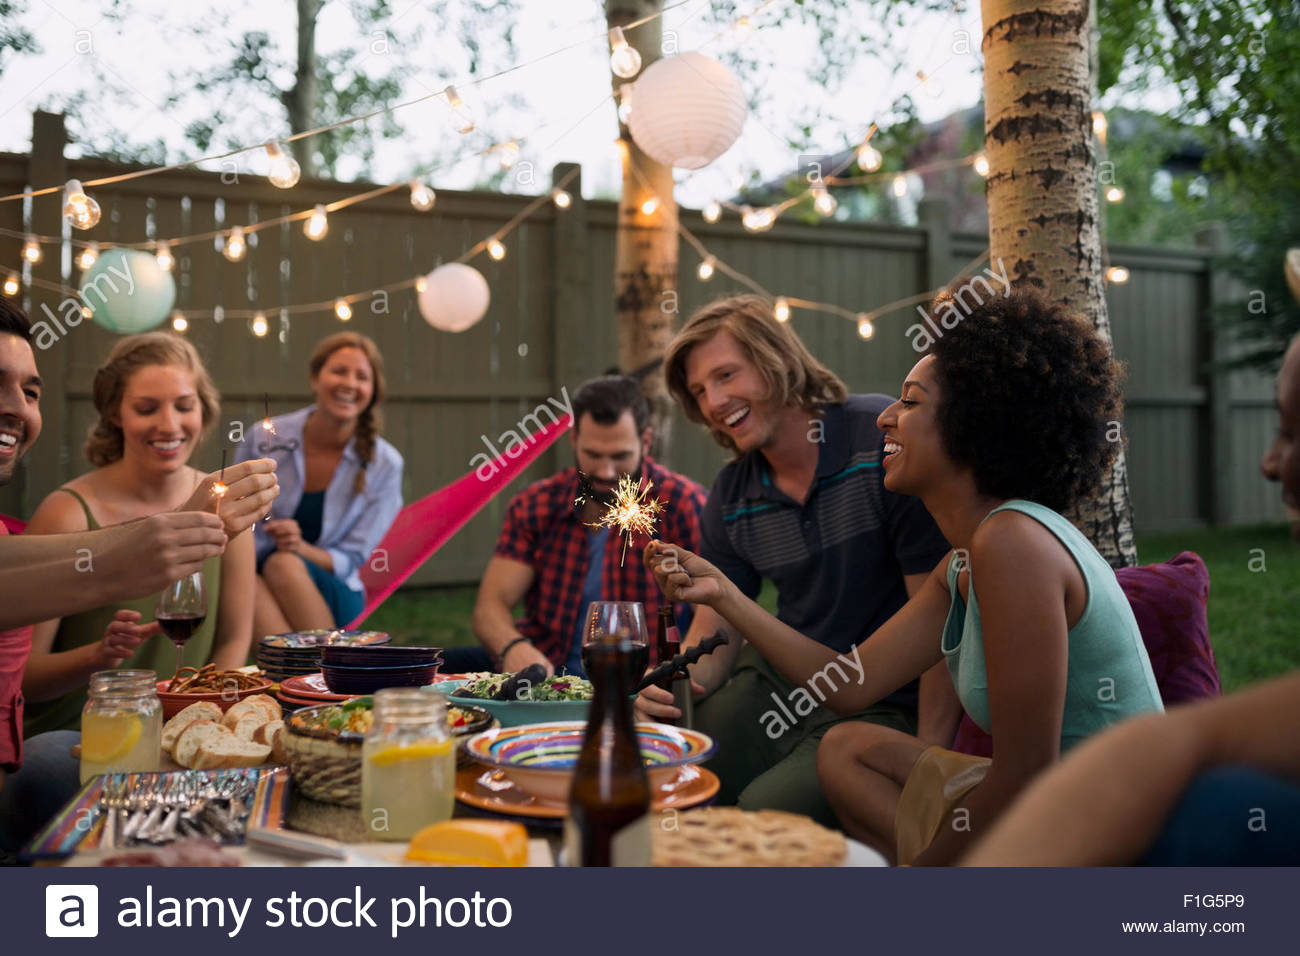 Friends with sparklers at backyard dinner party Stock Photo